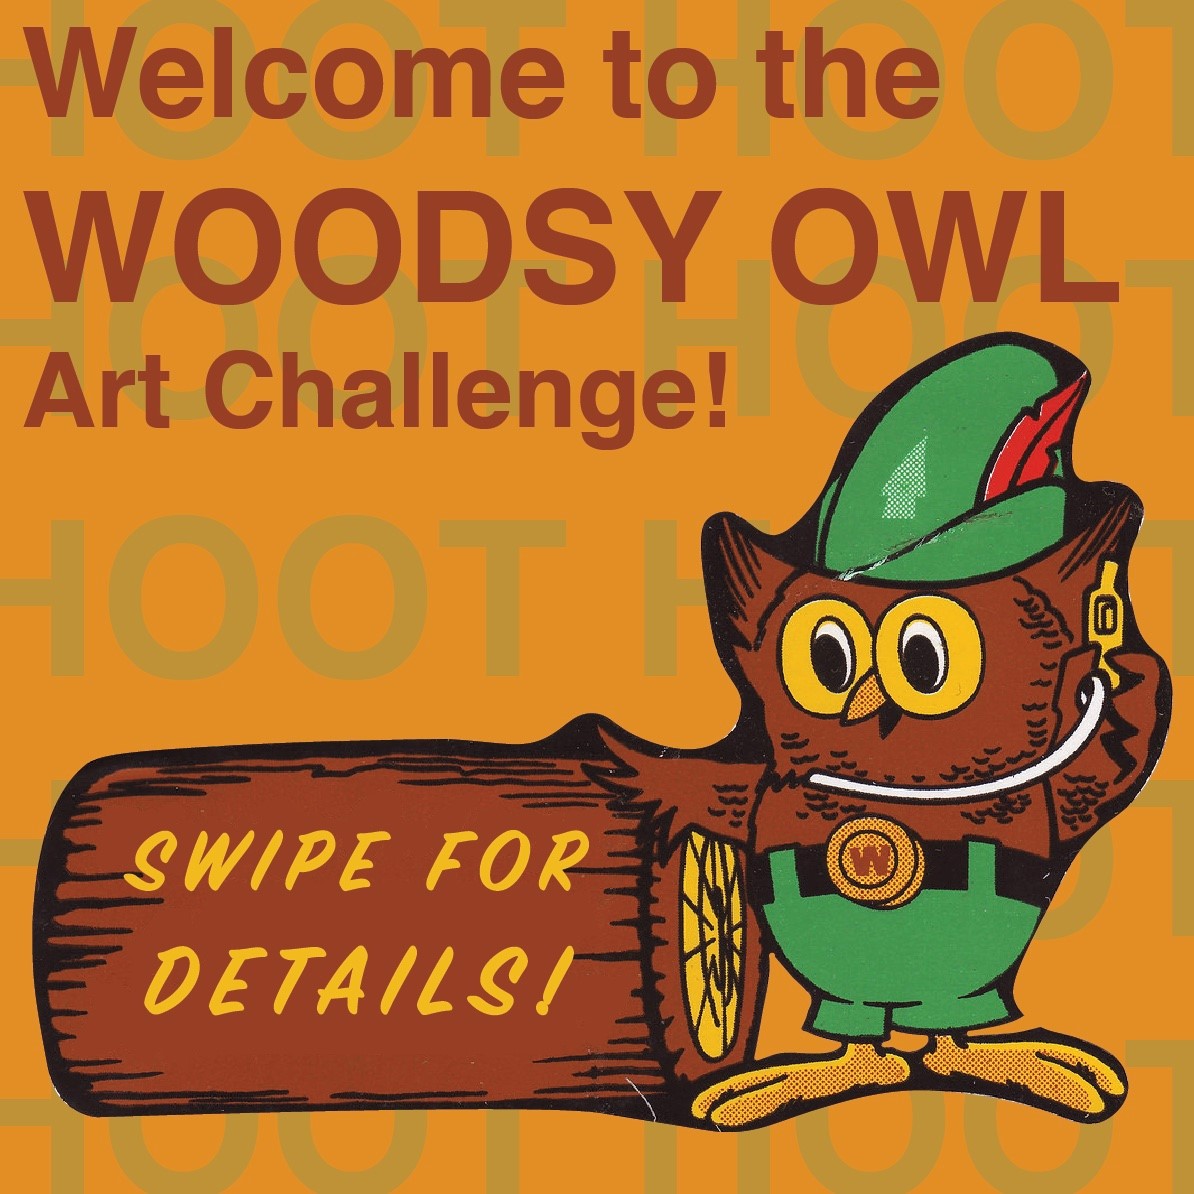 Woodsy Owl on Twitter: "Join the Woodsy Owl Art Challenge! 